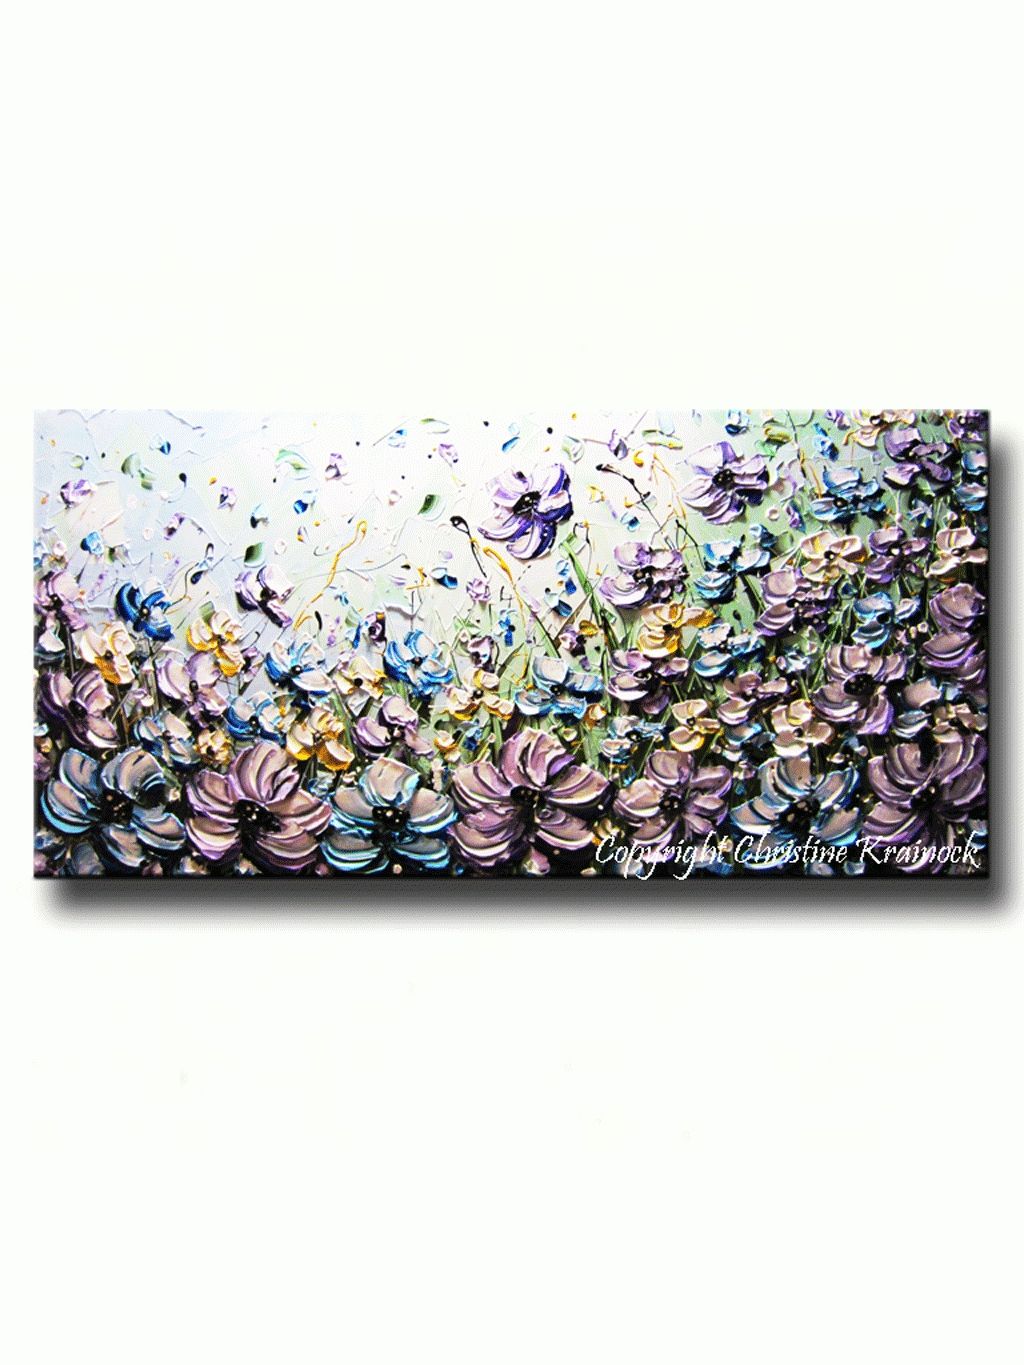 Original Art Abstract Painting Purple Blue Flowers Poppies In Latest Purple And Grey Abstract Wall Art (View 9 of 20)